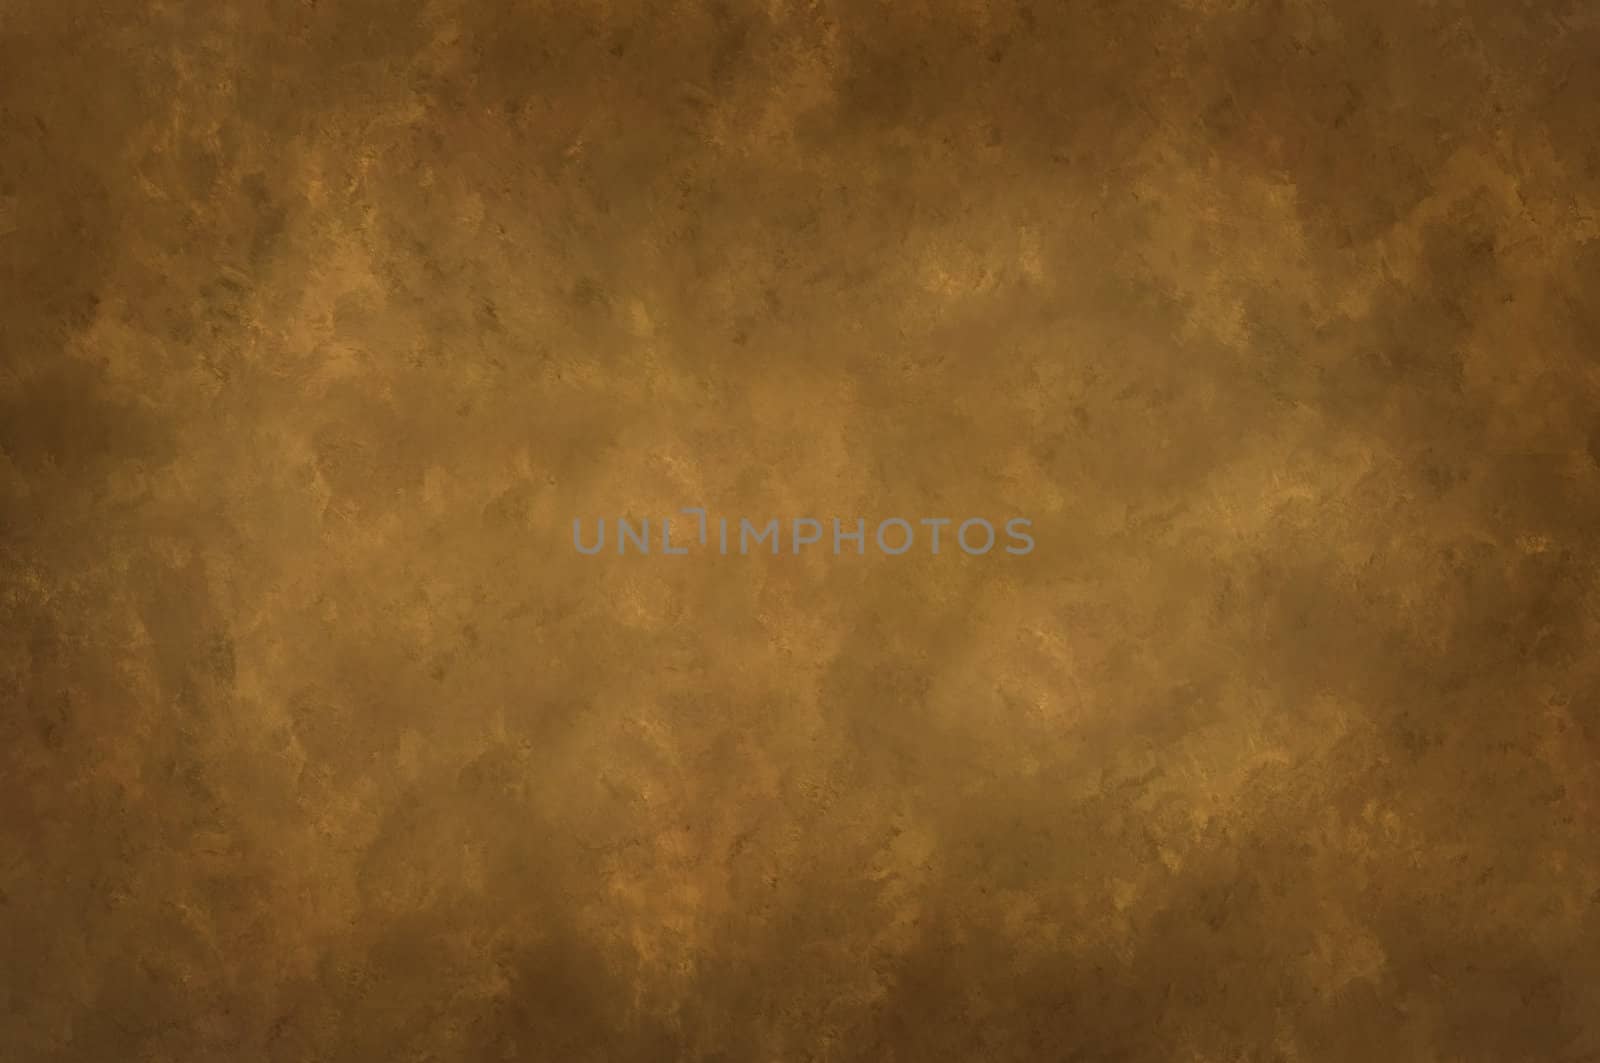 Brown mottled canvas background vignetted around the edges